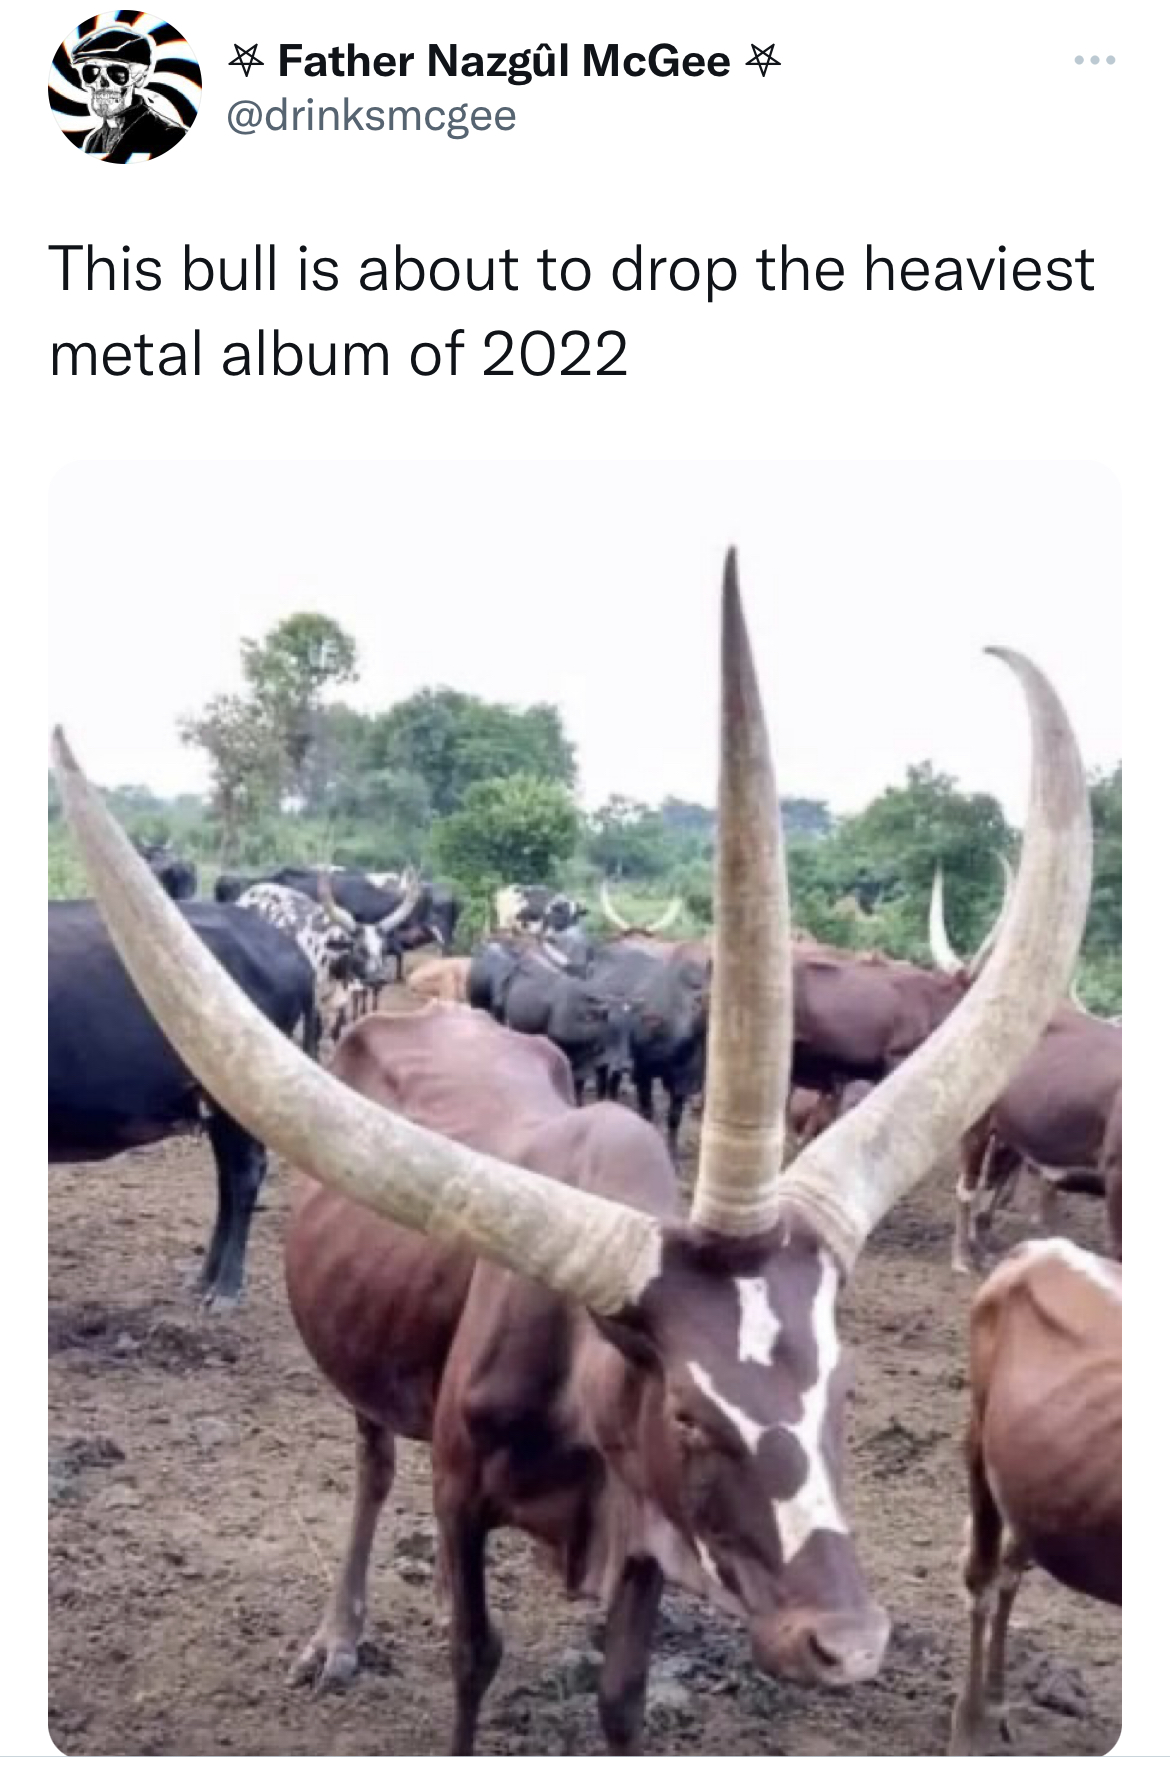 Savage and hilarious tweets - horn - Father Nazgl McGee This bull is about to drop the heaviest metal album of 2022